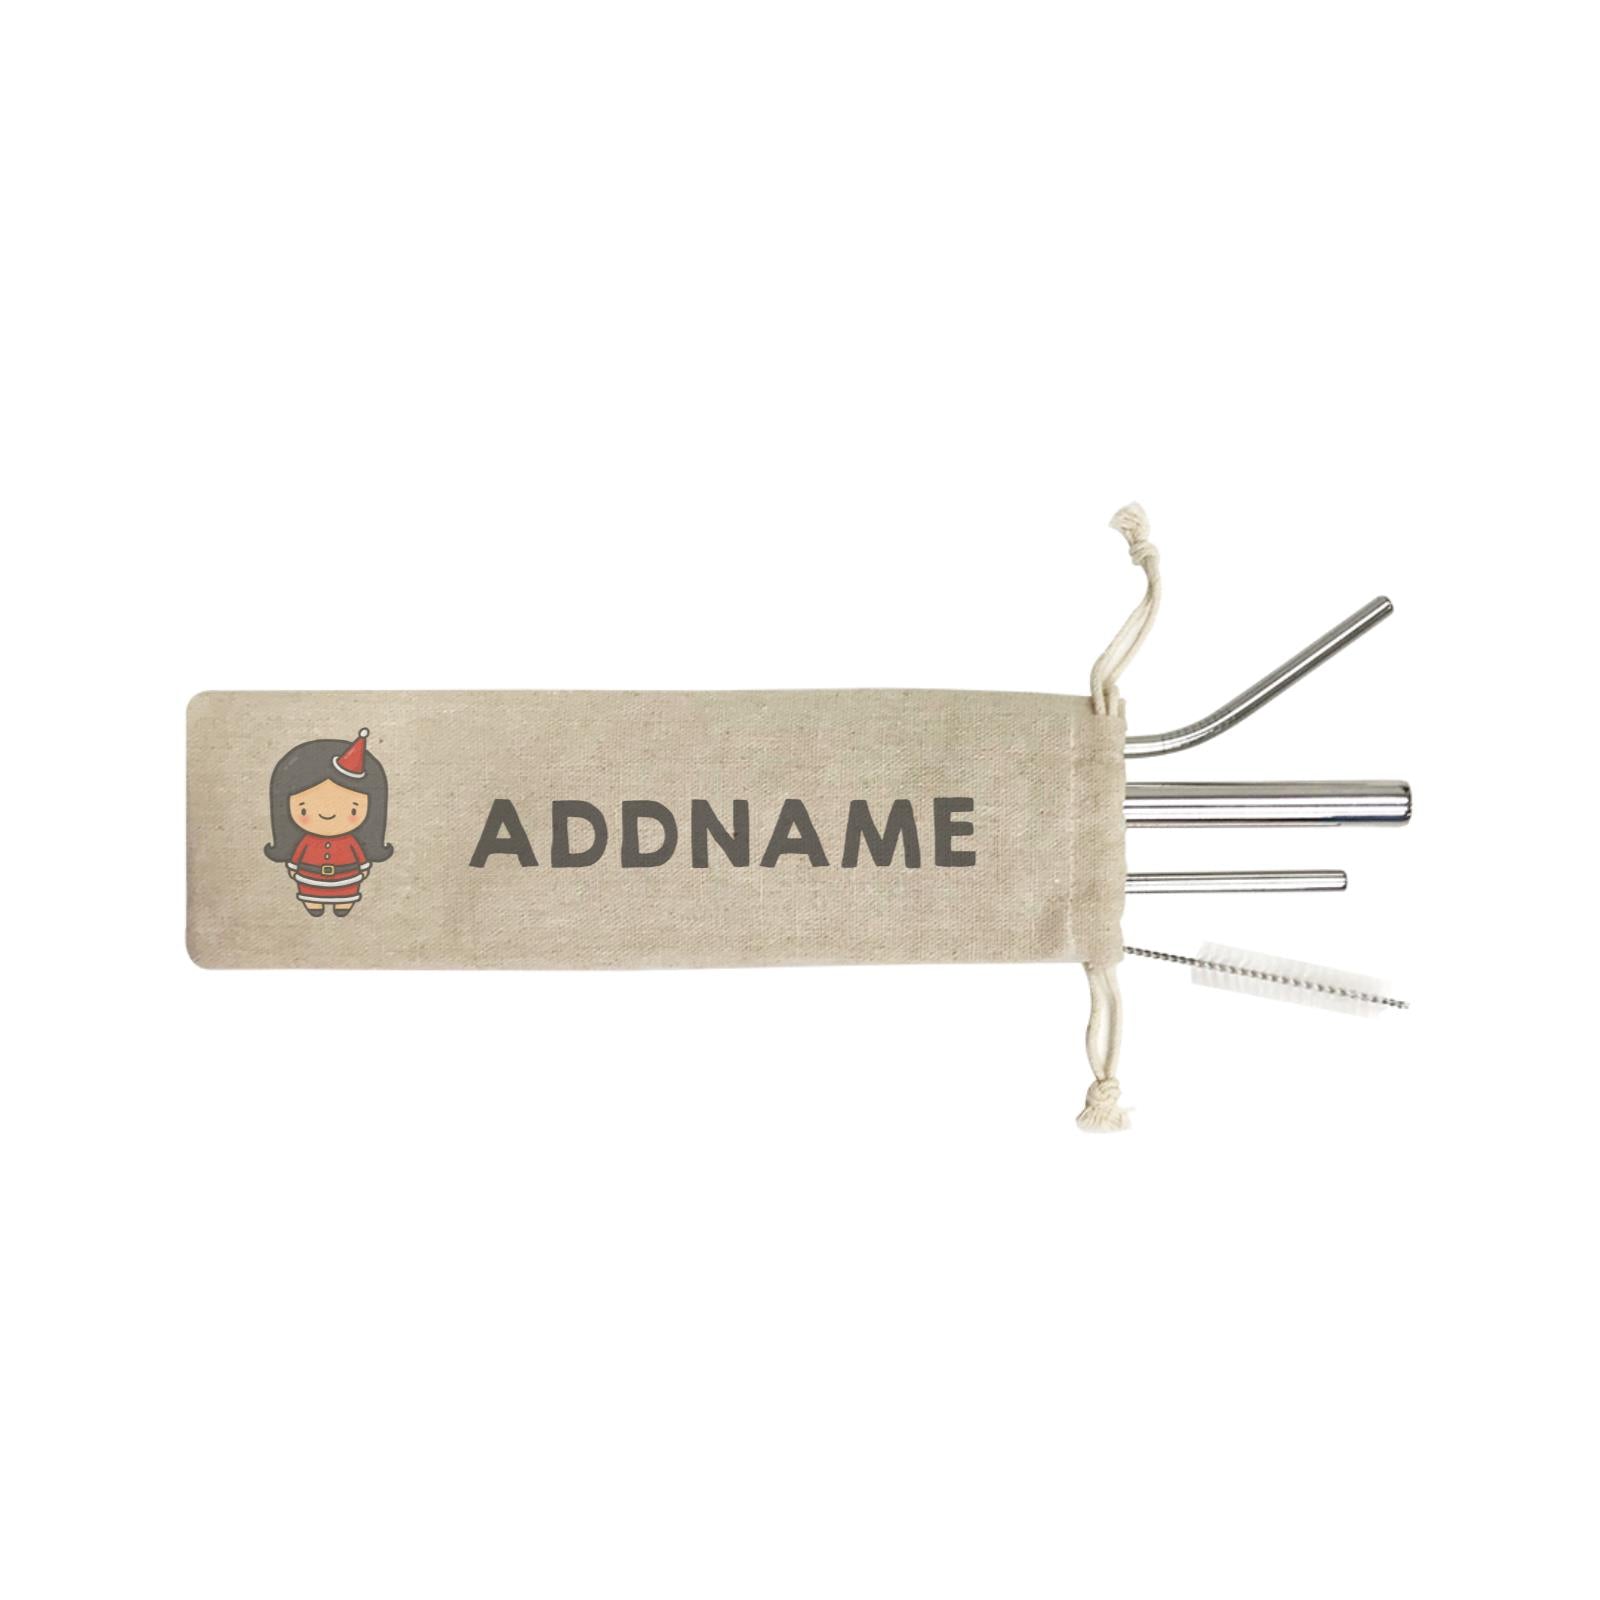 Xmas Cute Girl Addname SB 4-in-1 Stainless Steel Straw Set In a Satchel